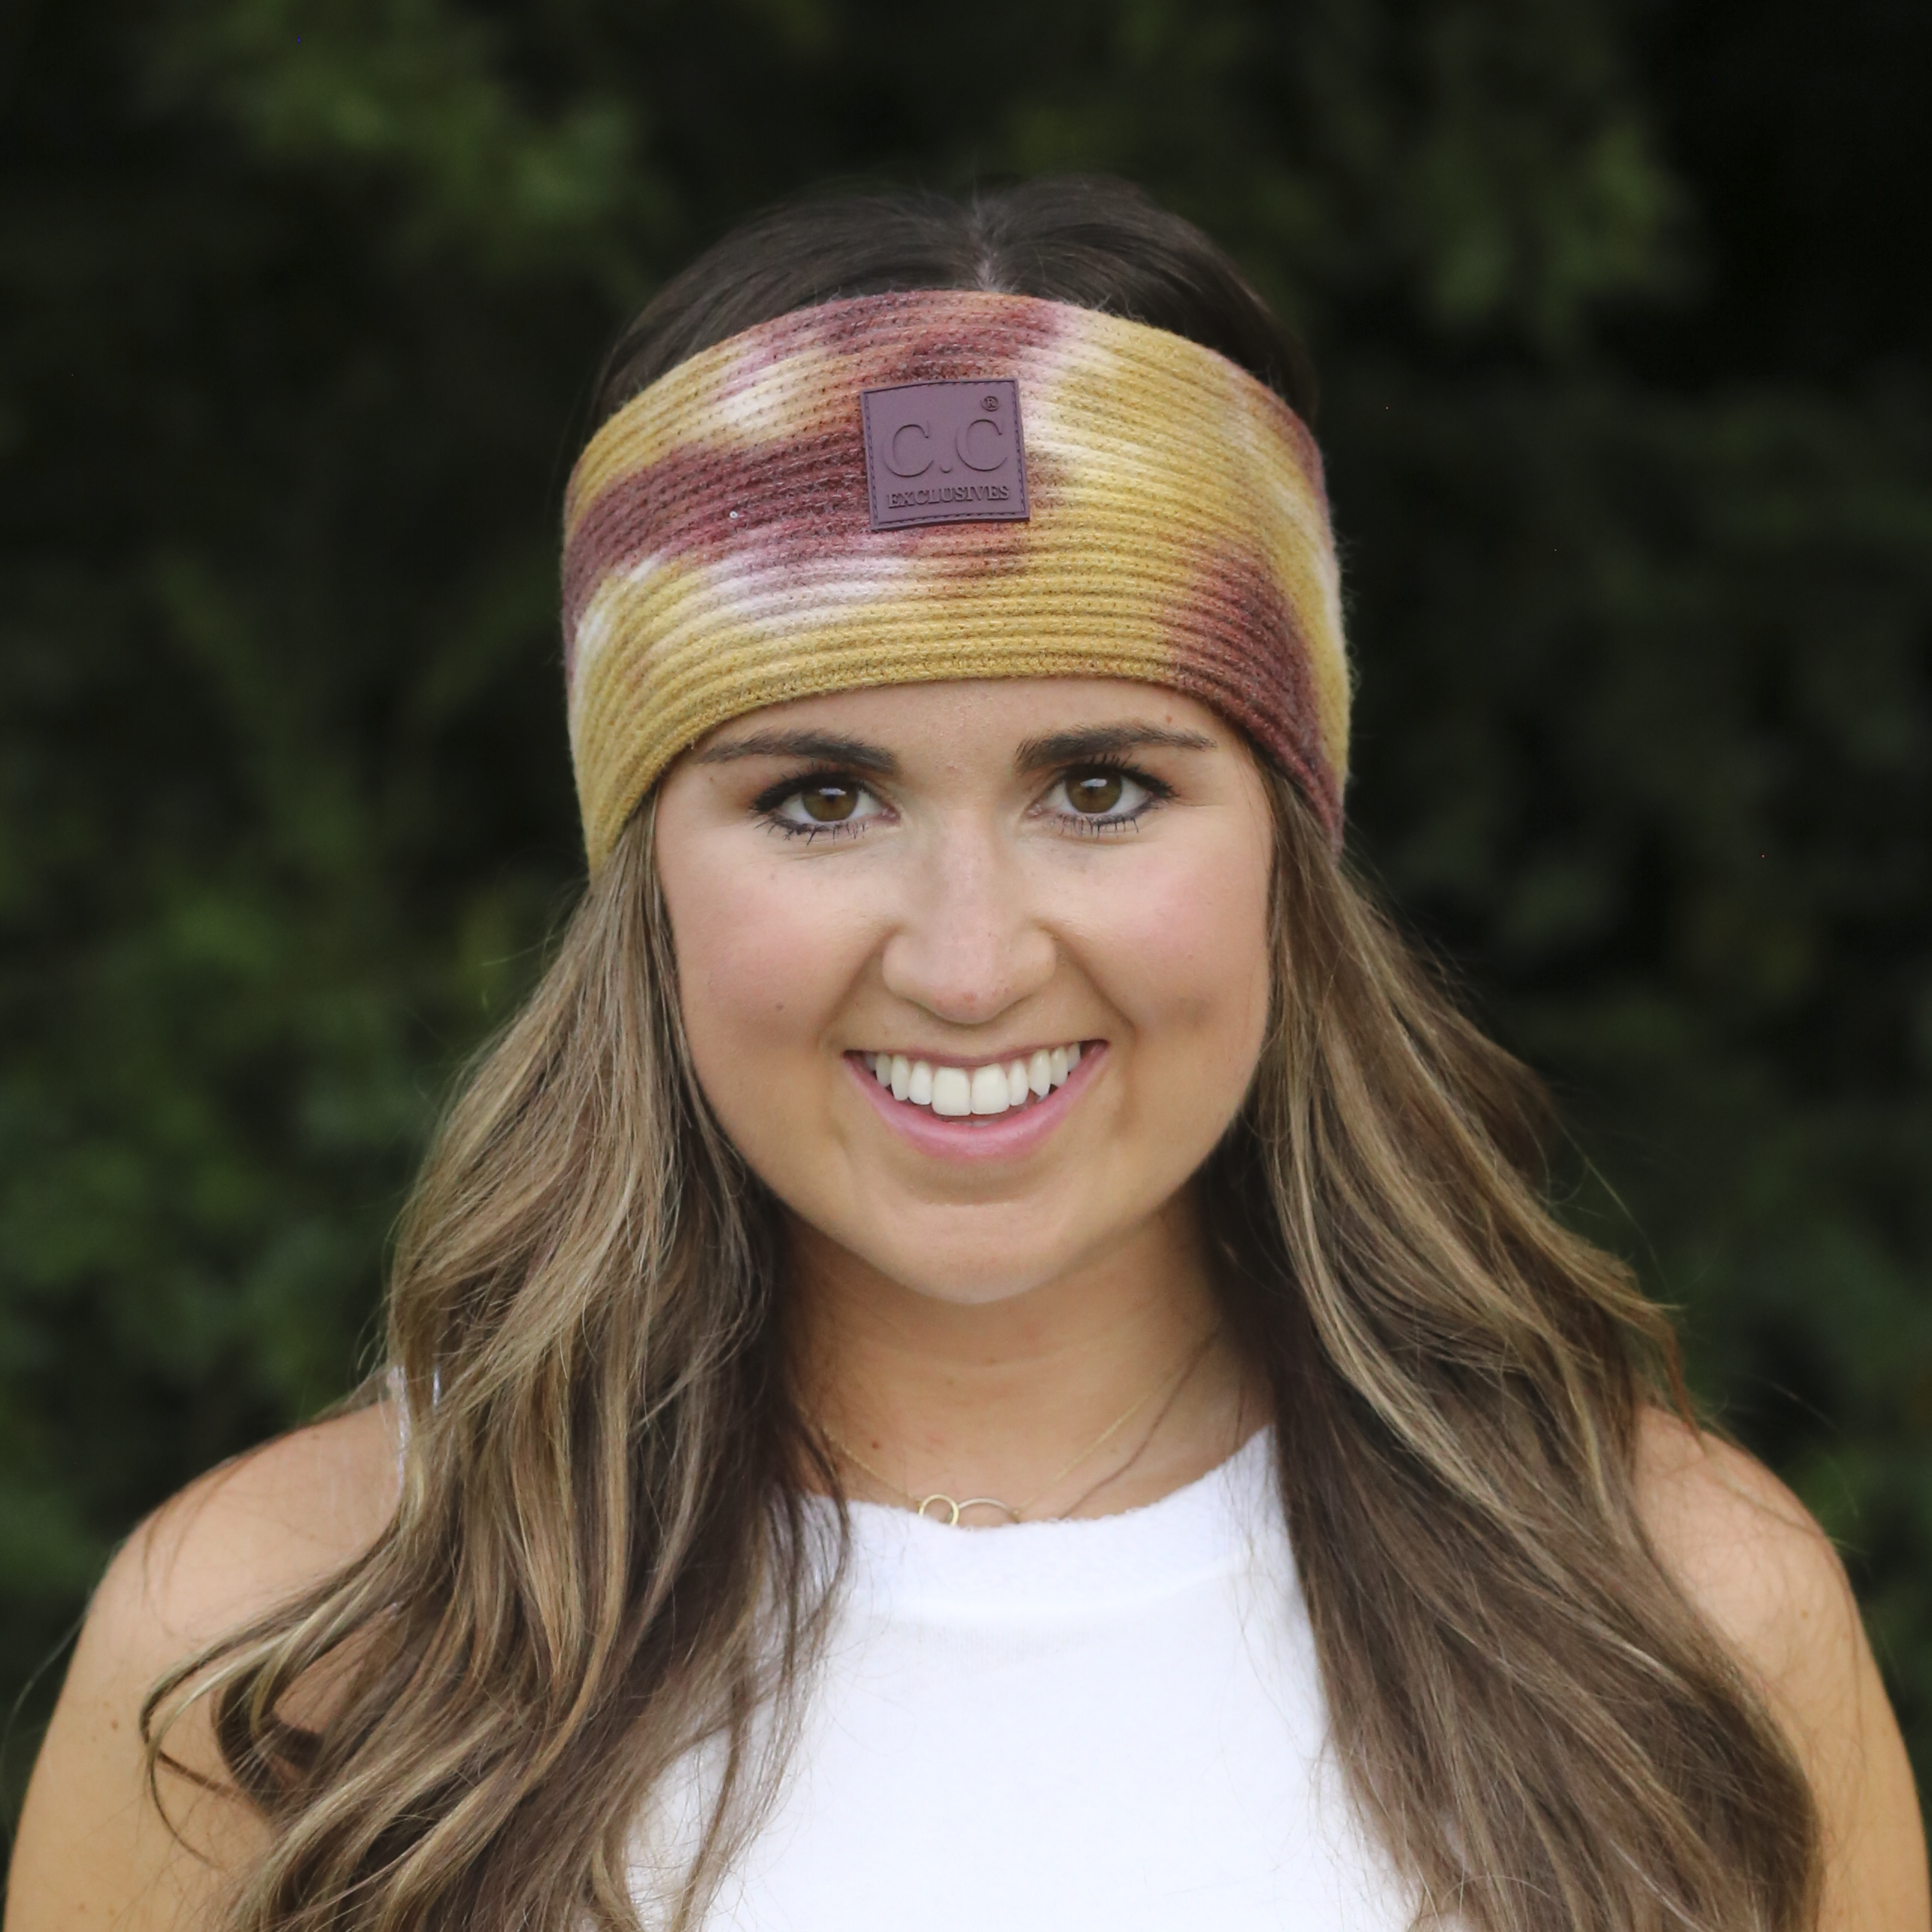 HW-7380 Tie Dye Headwrap with C.C Rubber Patch - Antique Moss/Wild Ginger